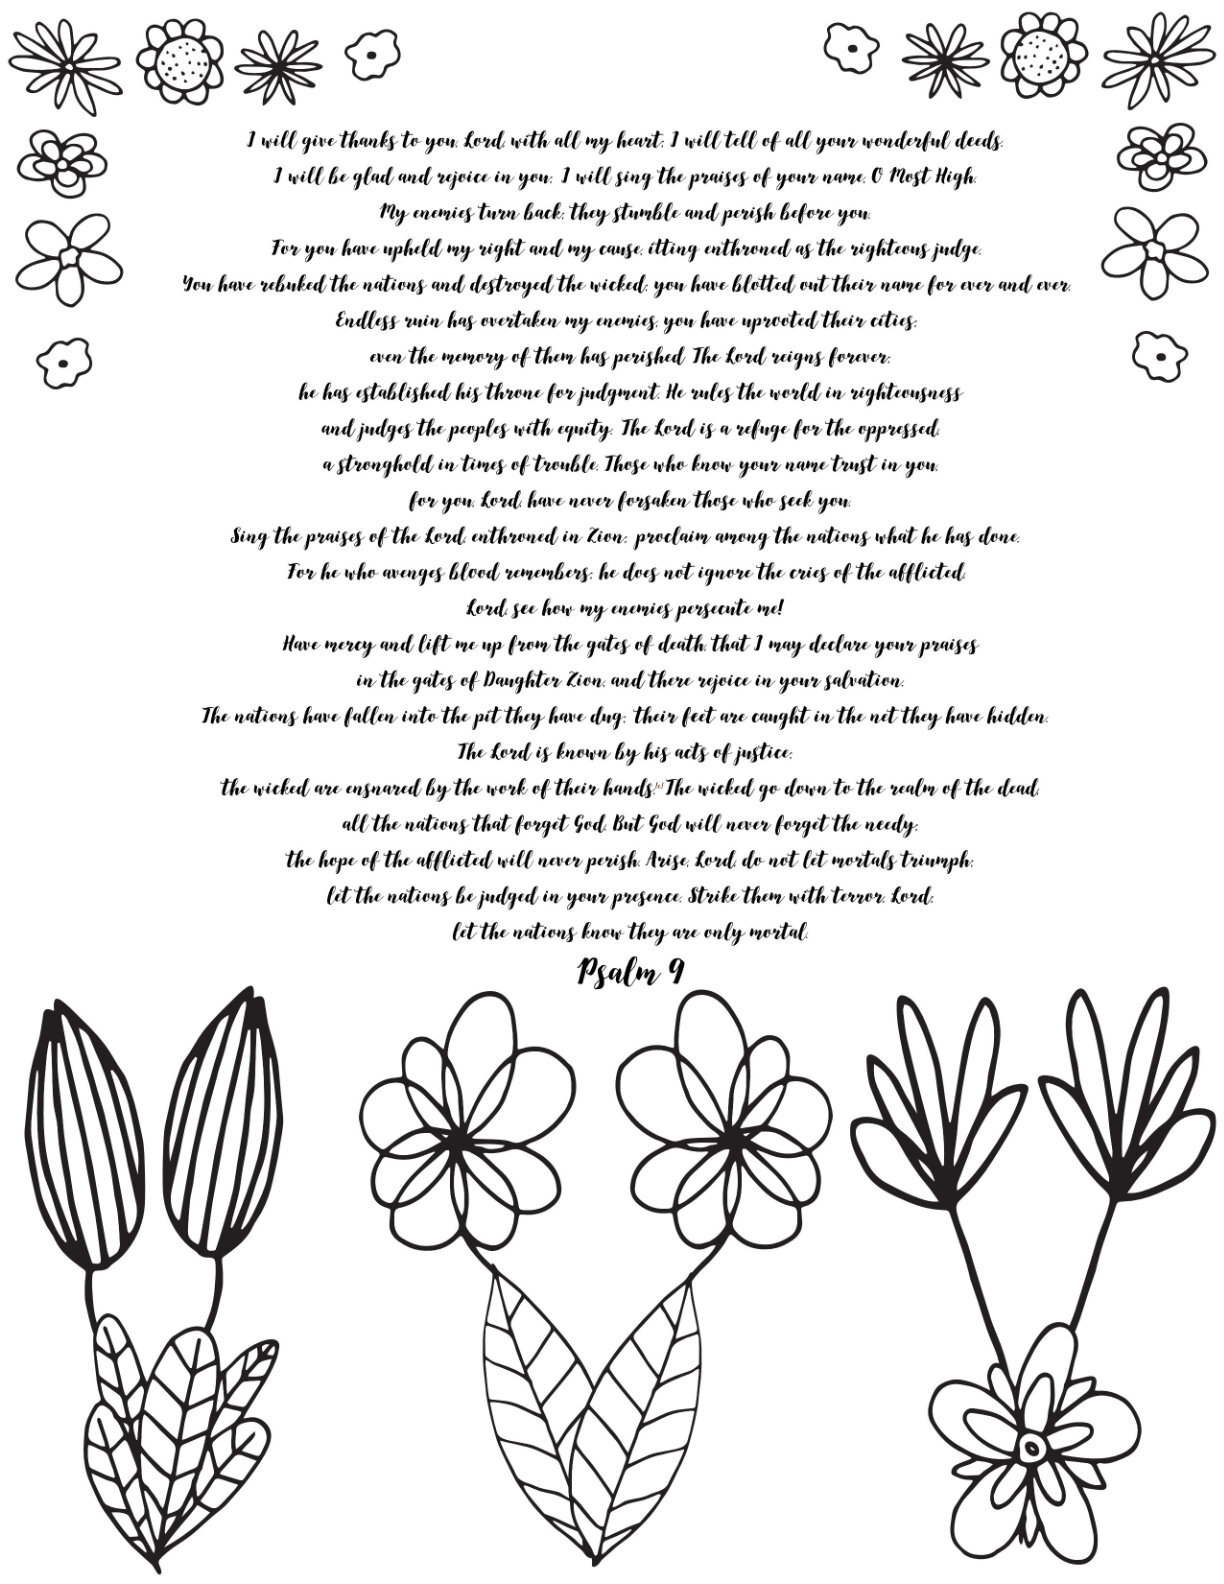 Free Psalm Coloring Page - Psalms 1 - 10 - Scripture Coloring From Stevie Doodles Psalm 9